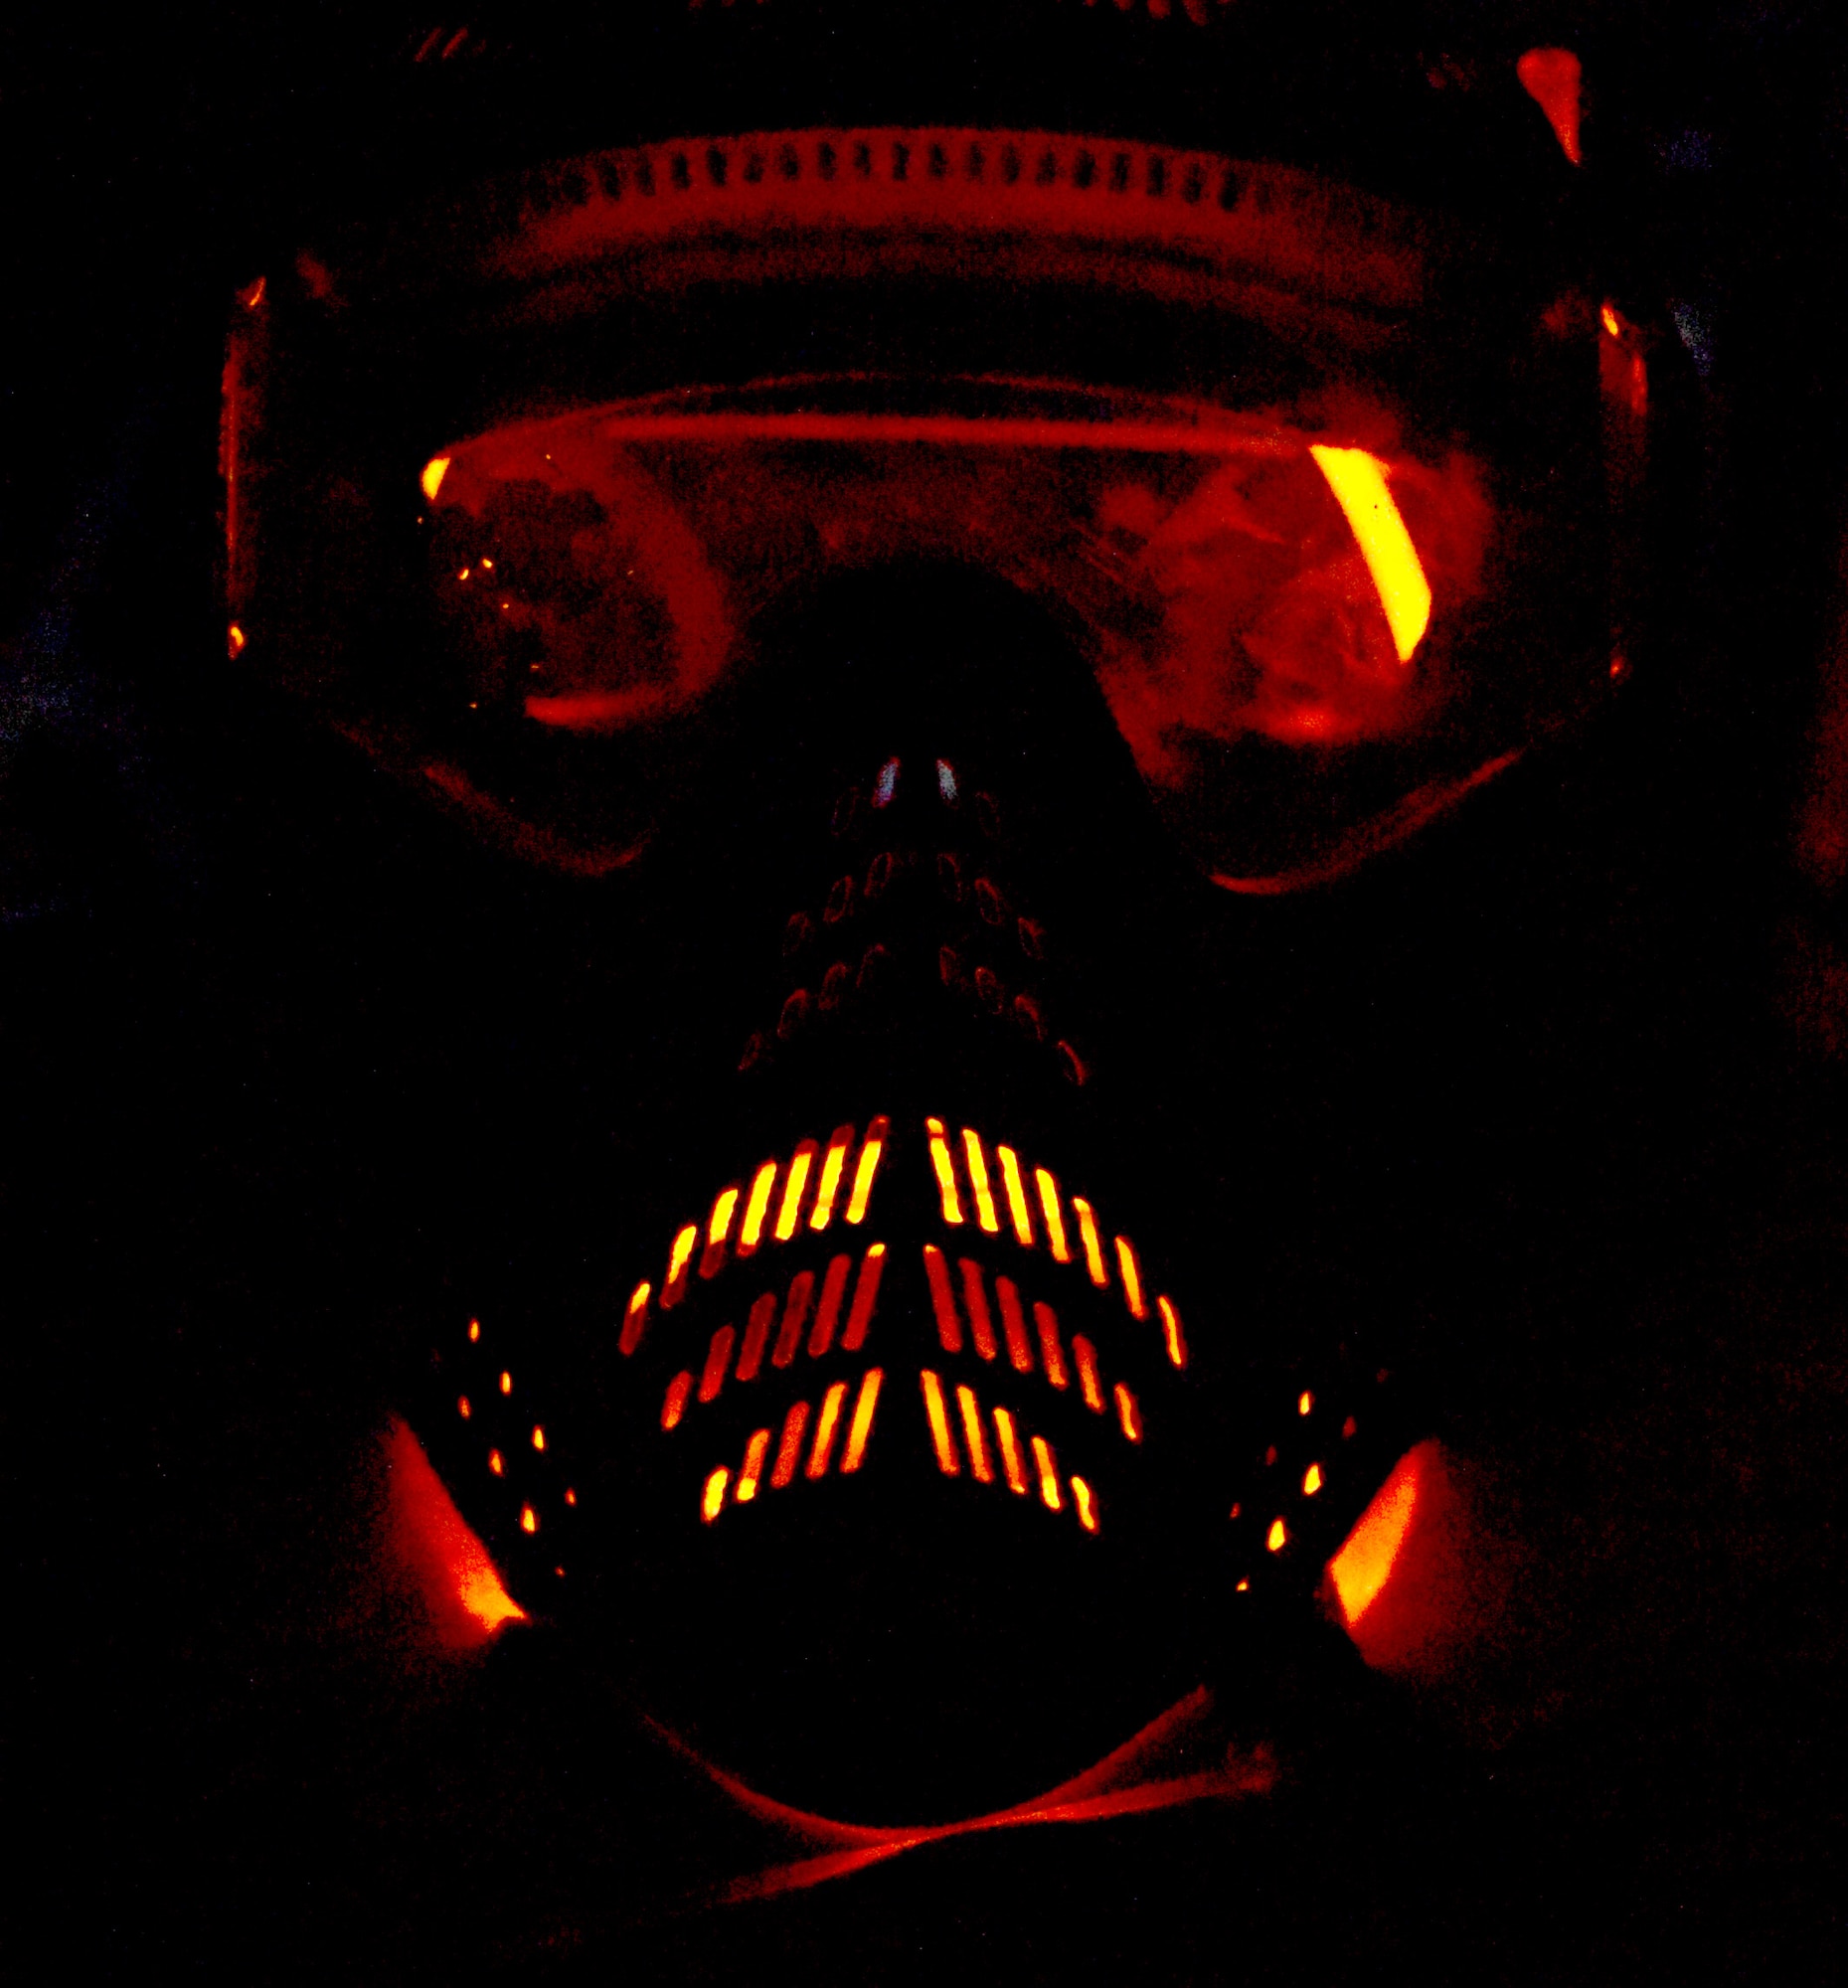 Team Barksdale members wore paintball masks for safety during a nighttime Zombie Apocalypse paintball game on Barksdale Air Force Base, La., Sept. 28, 2013. More than 100 Team Barksdale members participated in the game held on the East Reservation on base. (U.S. Air Force photo/Staff Sgt. Amber Corcoran)